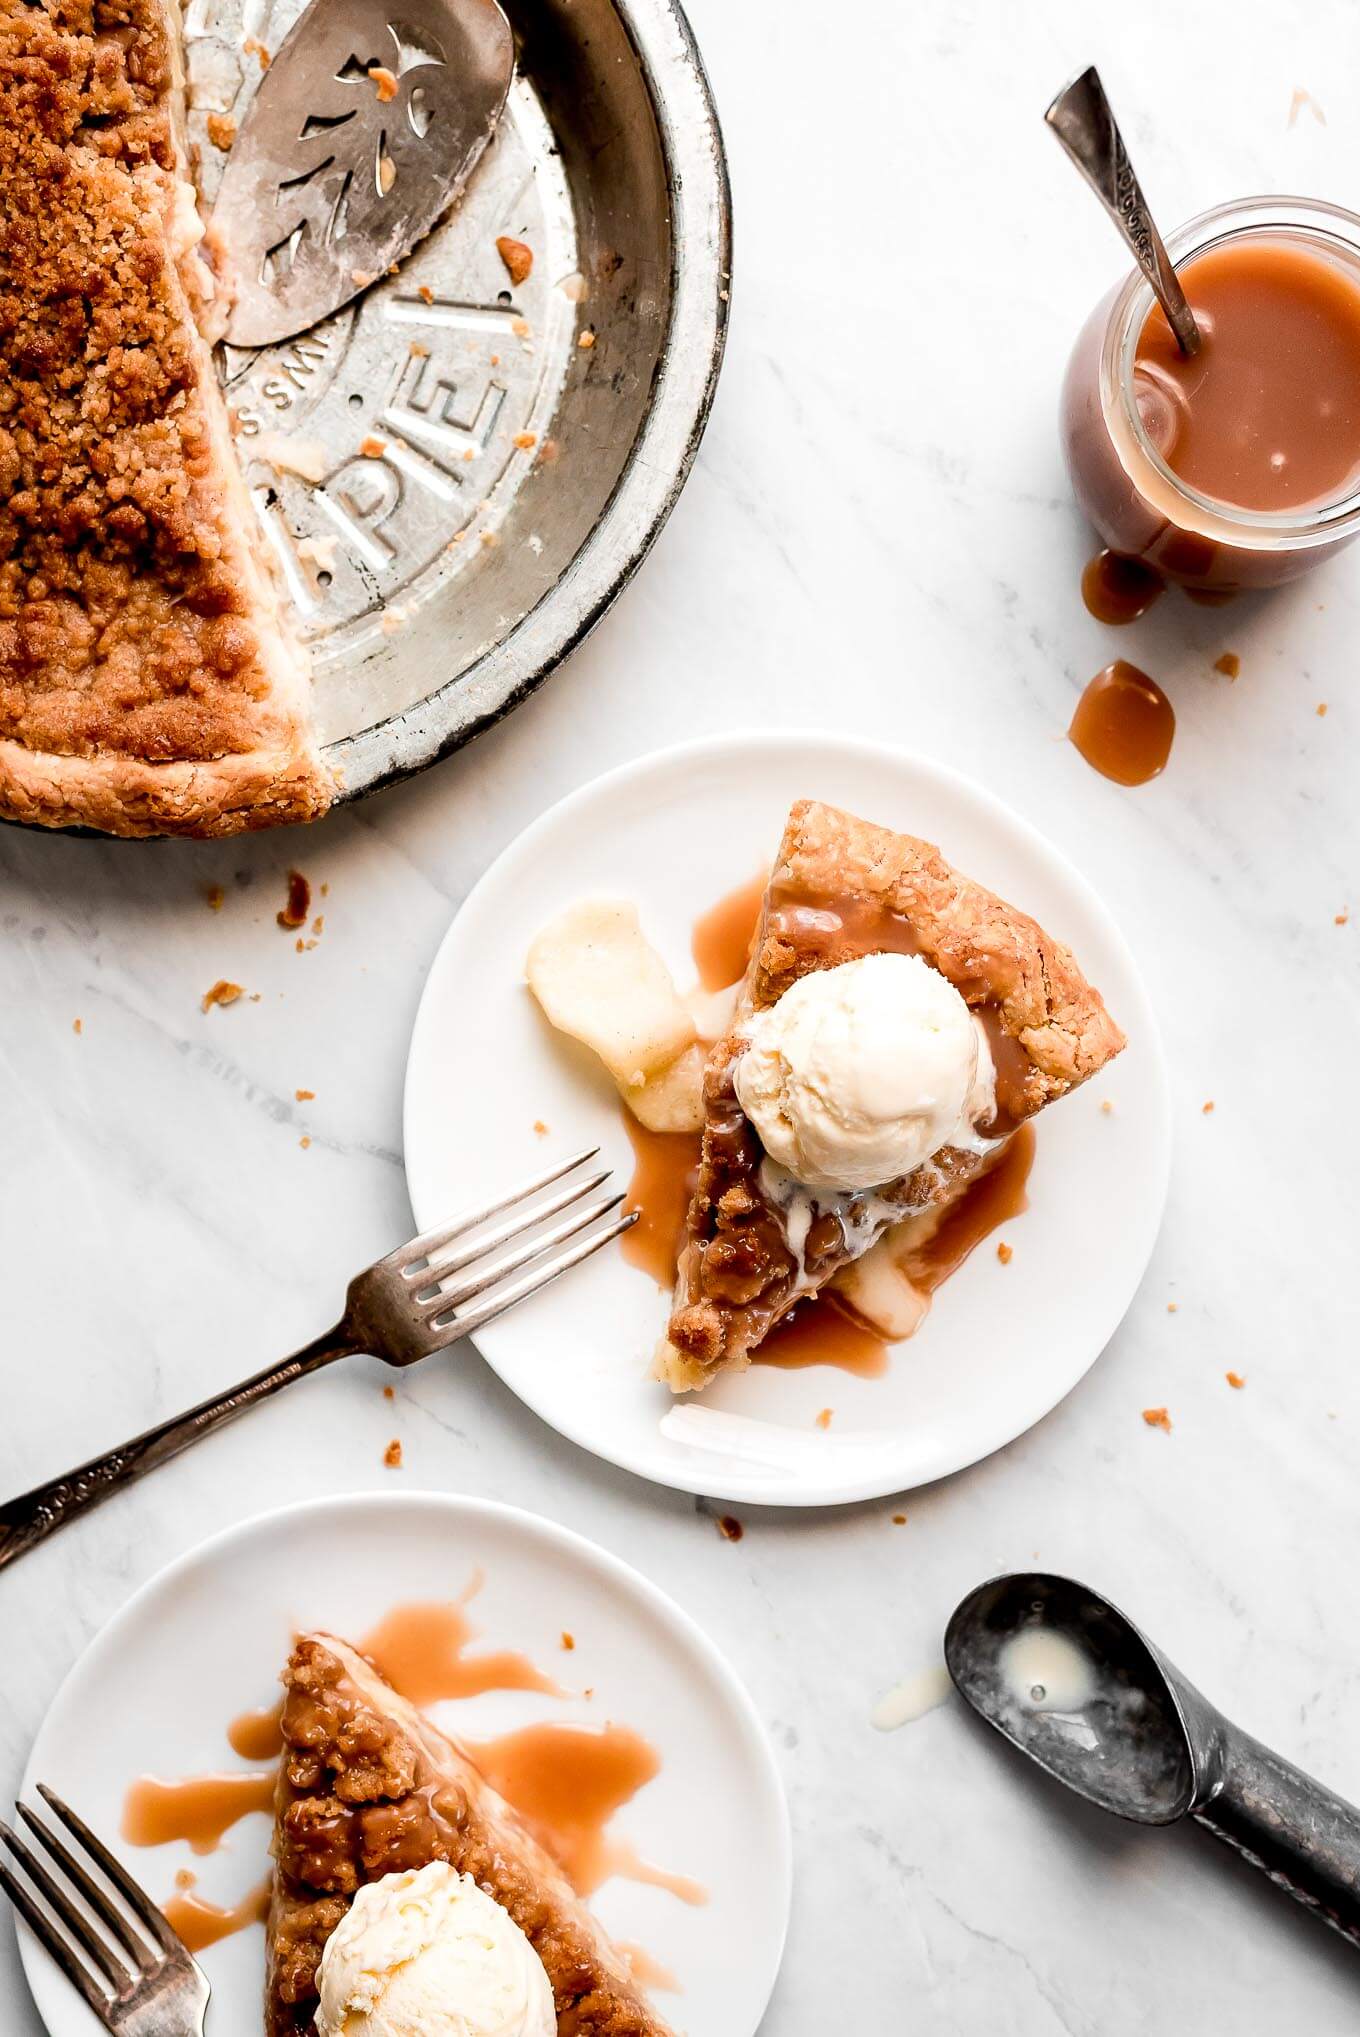 Slices of Dutch Apple Pie on plates topped with ice cream and caramel sauce.